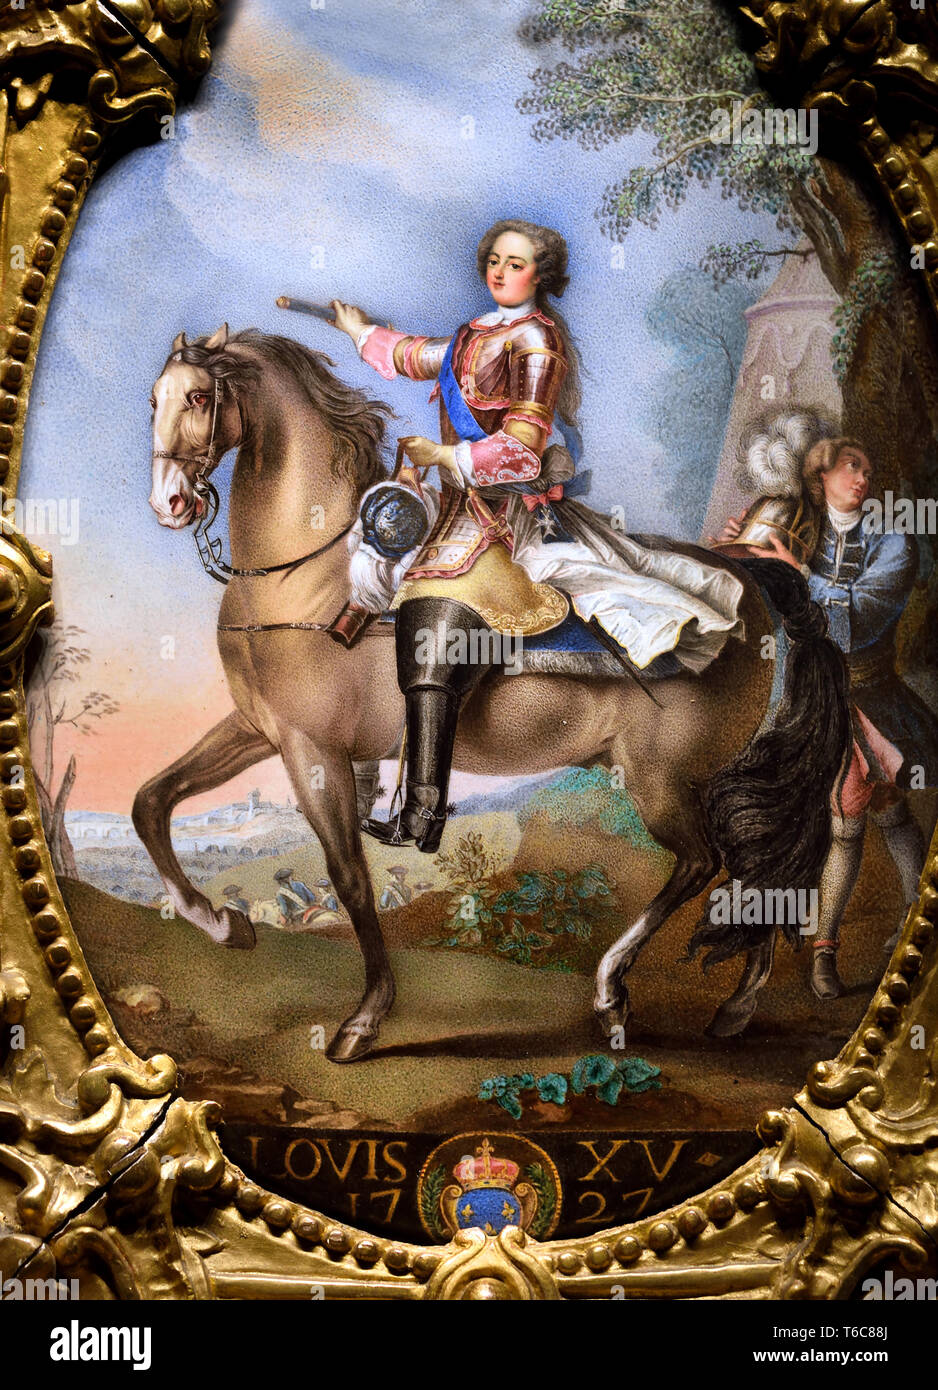 King Louis XV  1710 – 1774, known as Louis the Beloved, monarch of the House of Bourbon, ruled as King of France from 1 September 1715 until his death in 1774. France, French,( Enamel painted on copper, carved and gilded wooden frame ) after a portrait by Charles André van Loo -  Carle van Loo 1705 -1765 France French Stock Photo